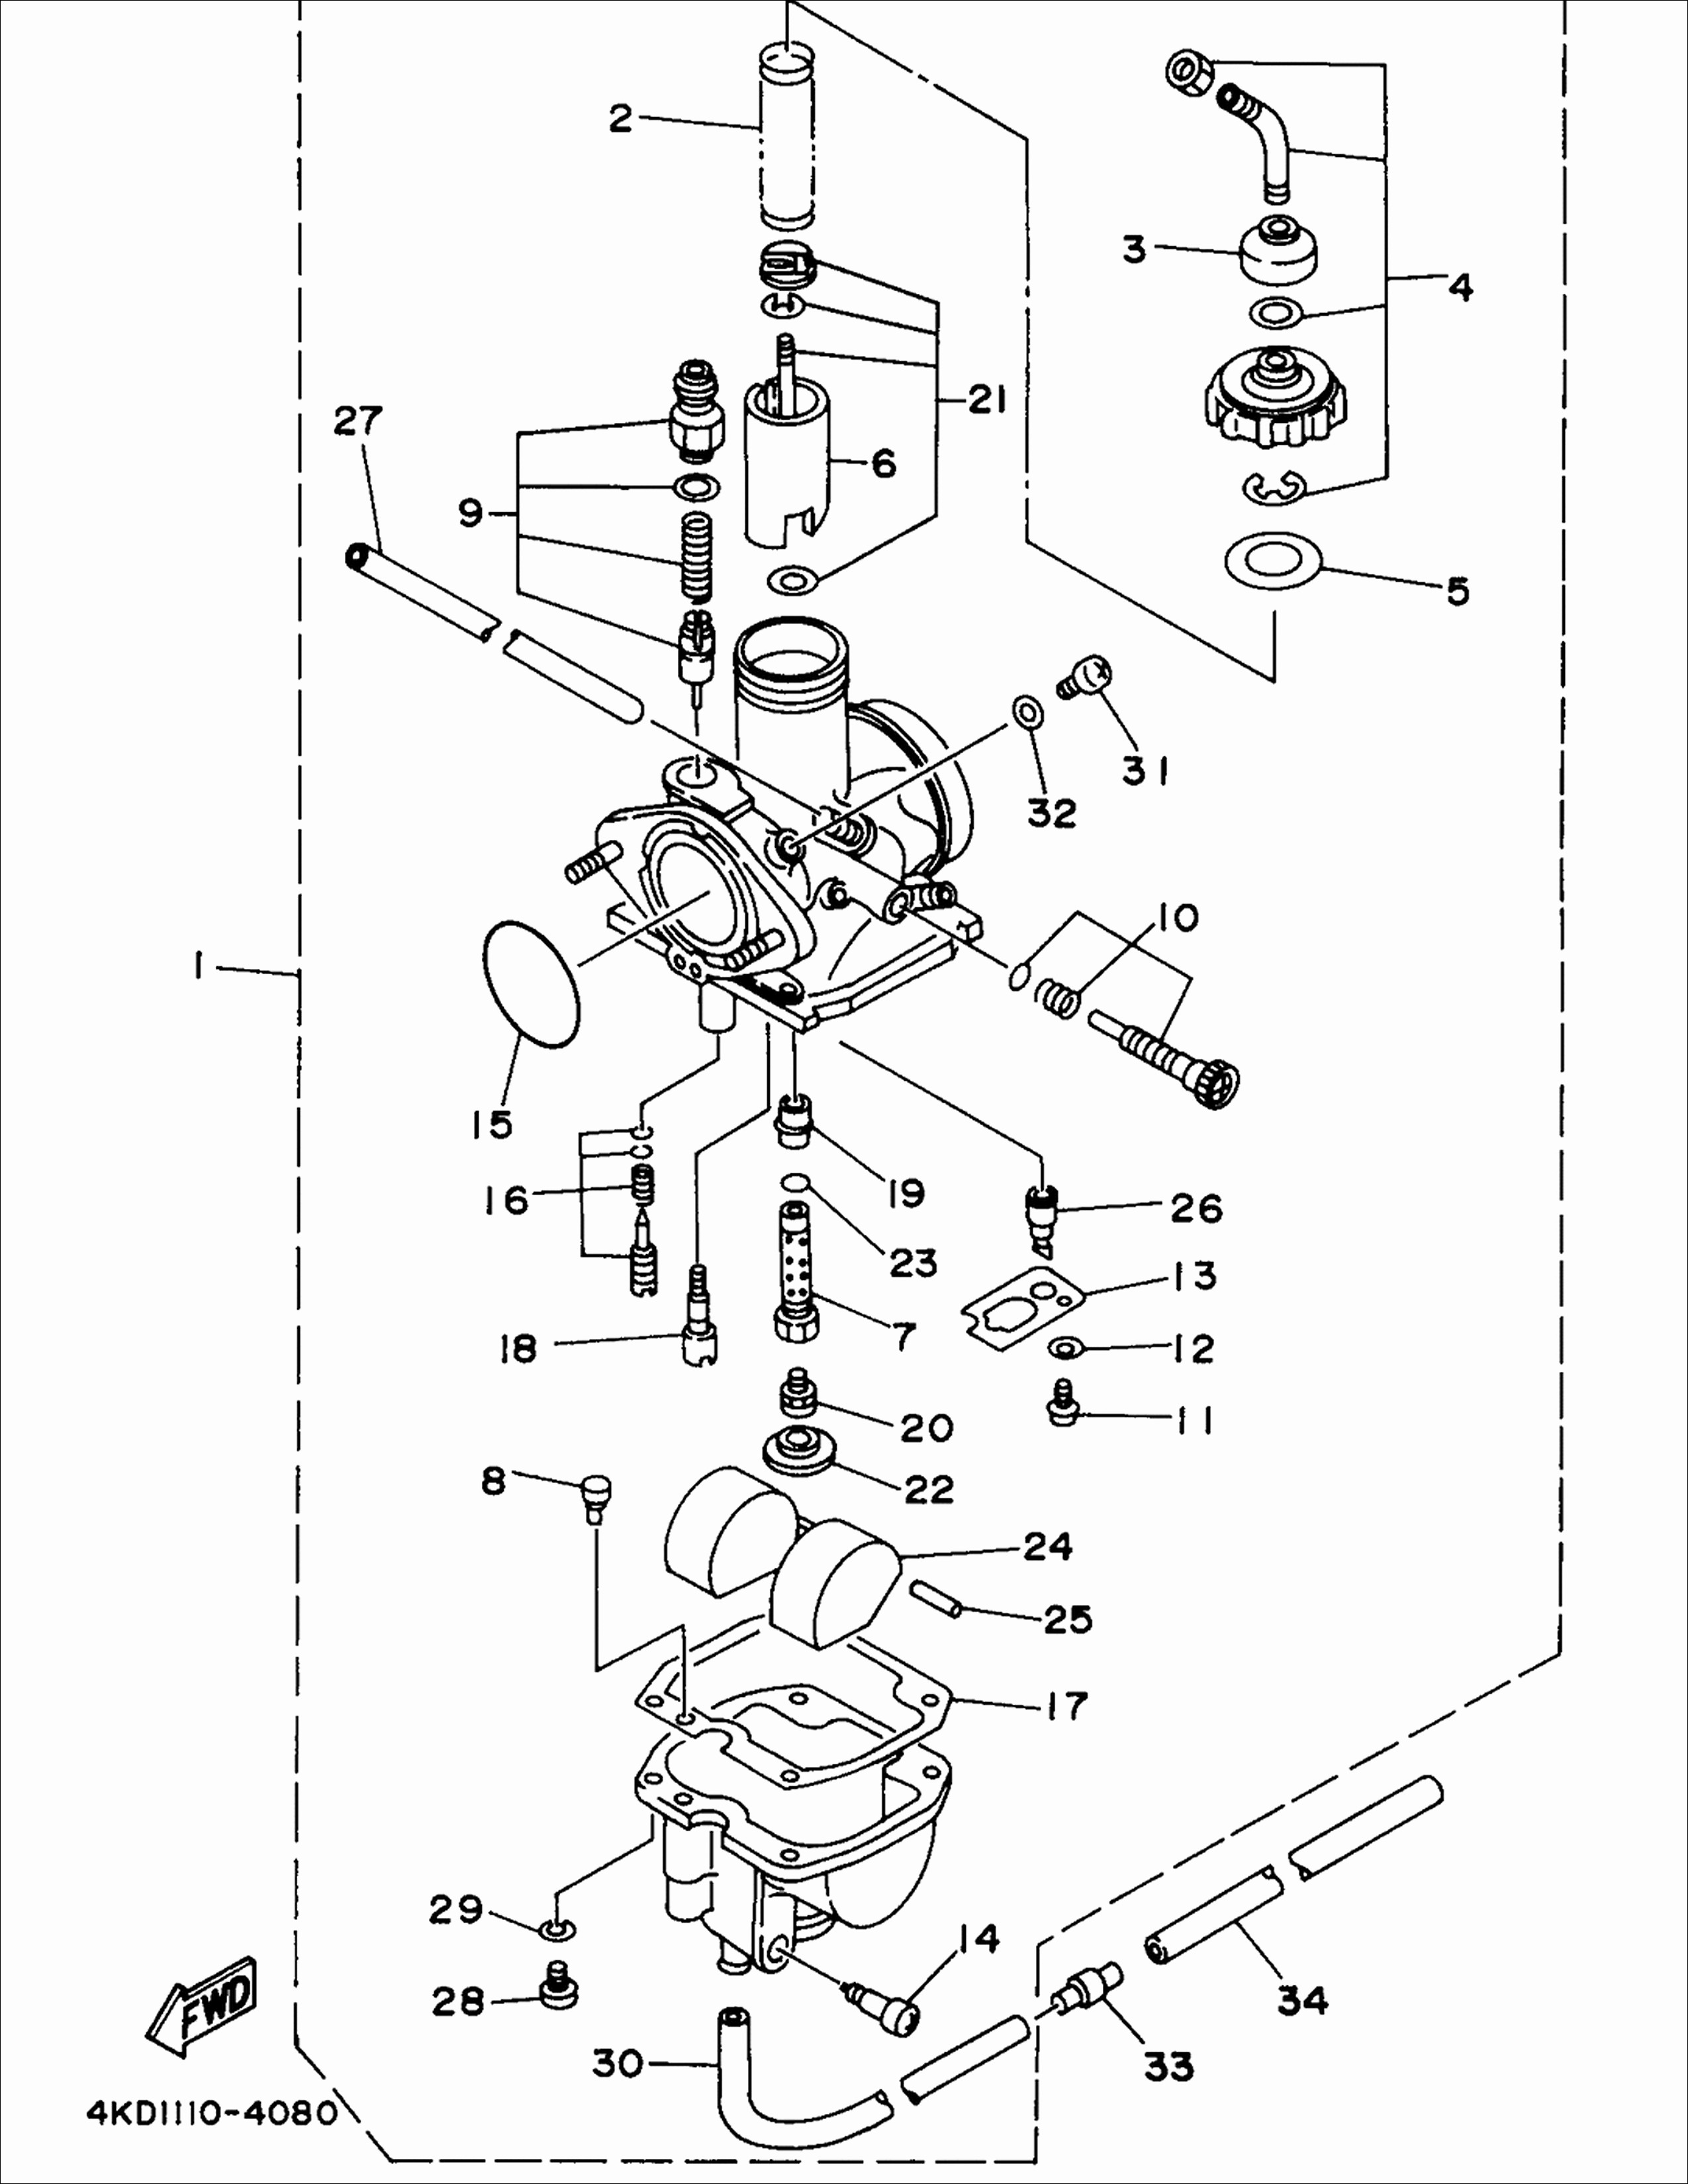 1987 ford f 350 electric choke wiring diagram wire center u2022 rh gogowire co 1972 Ford Truck 1967 Ford Truck